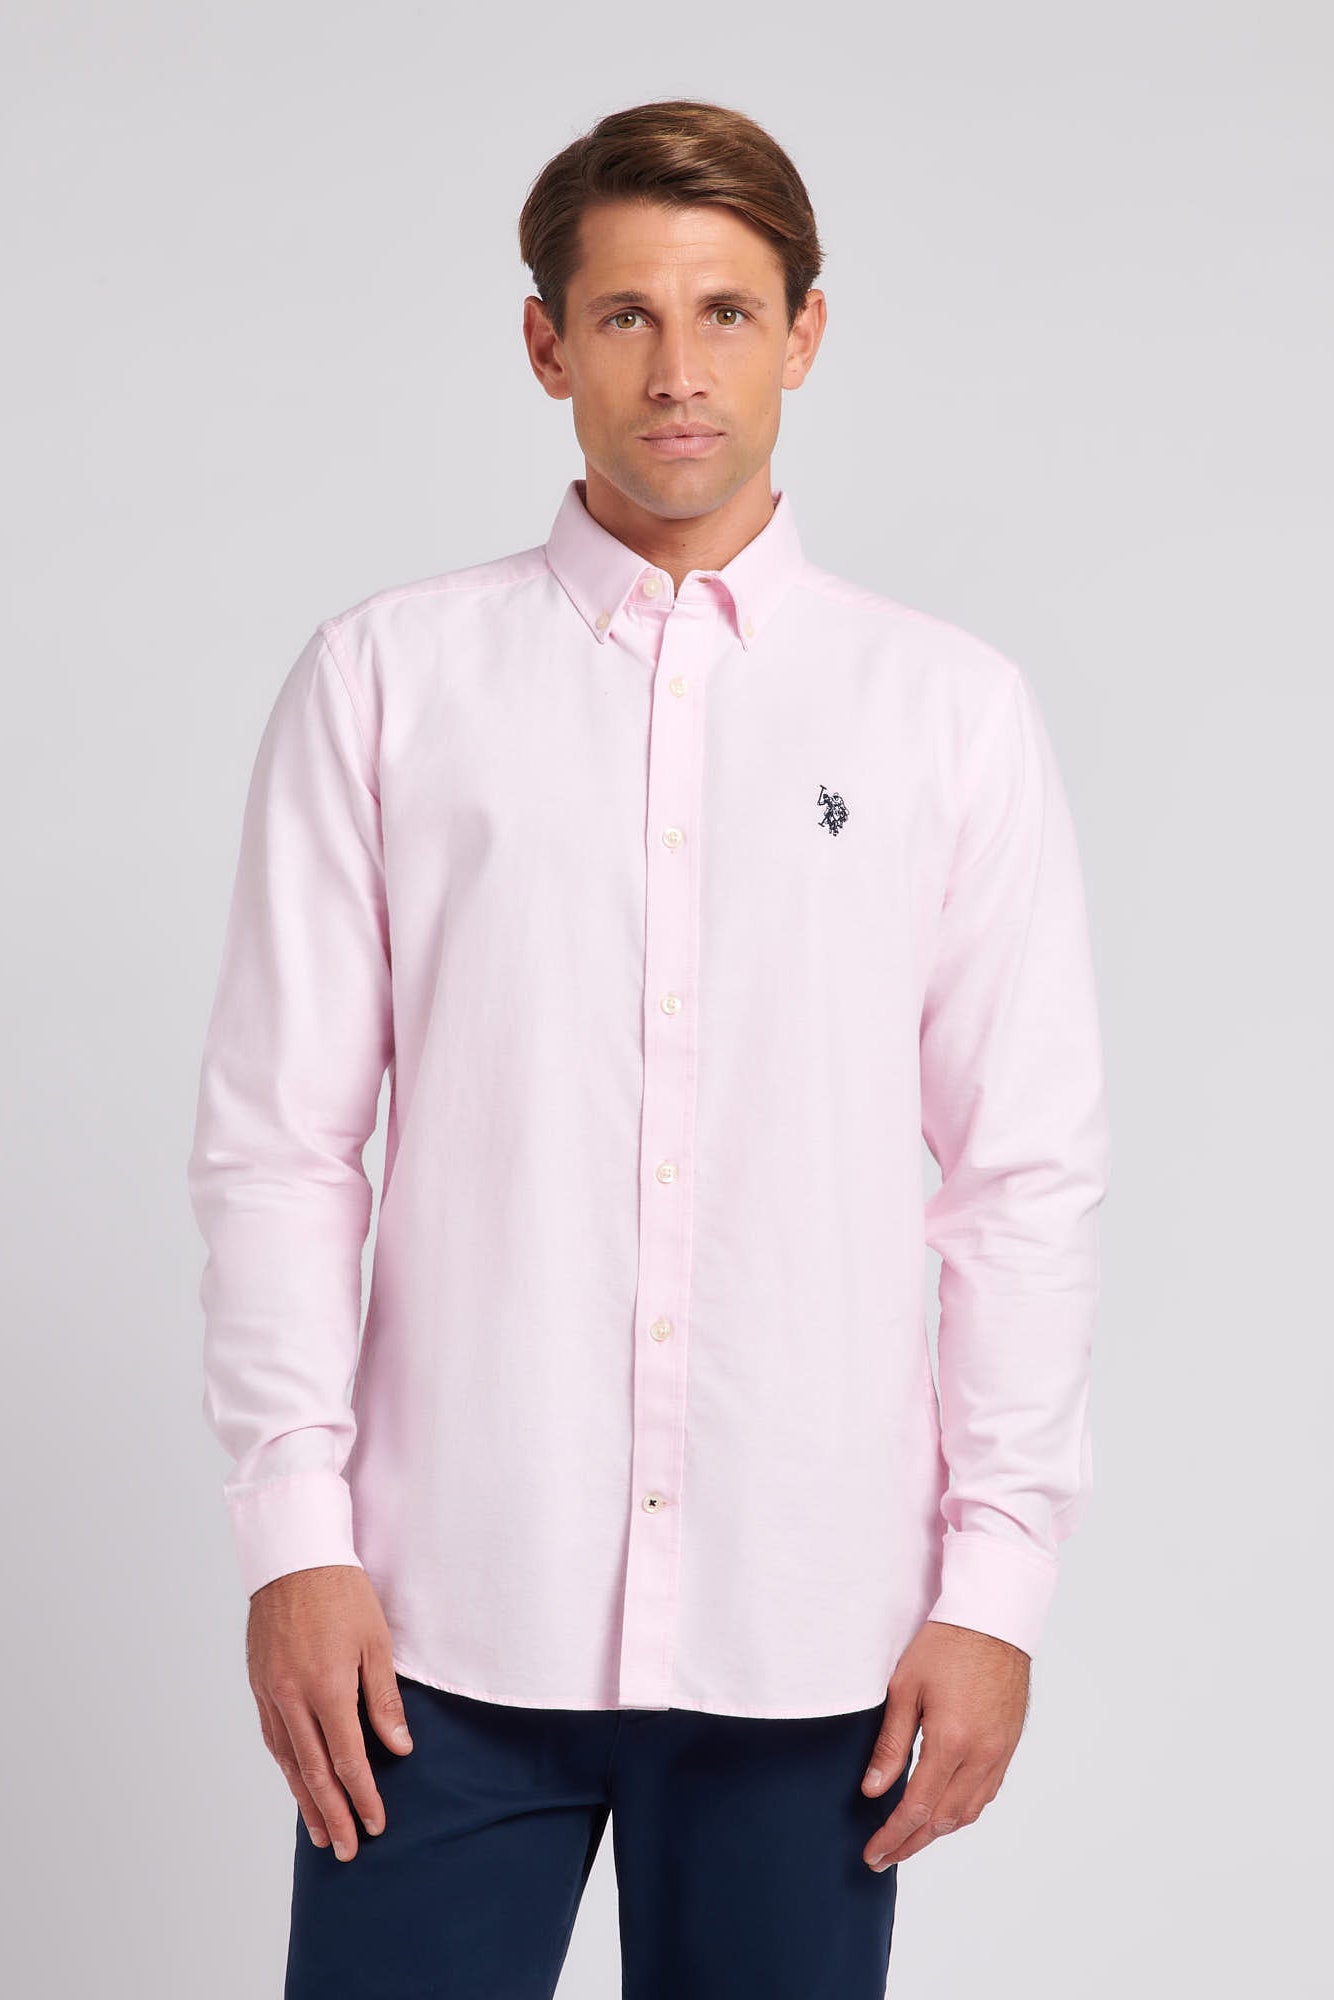 U.S. Polo Assn. Mens Oxford Shirt in Orchid Pink